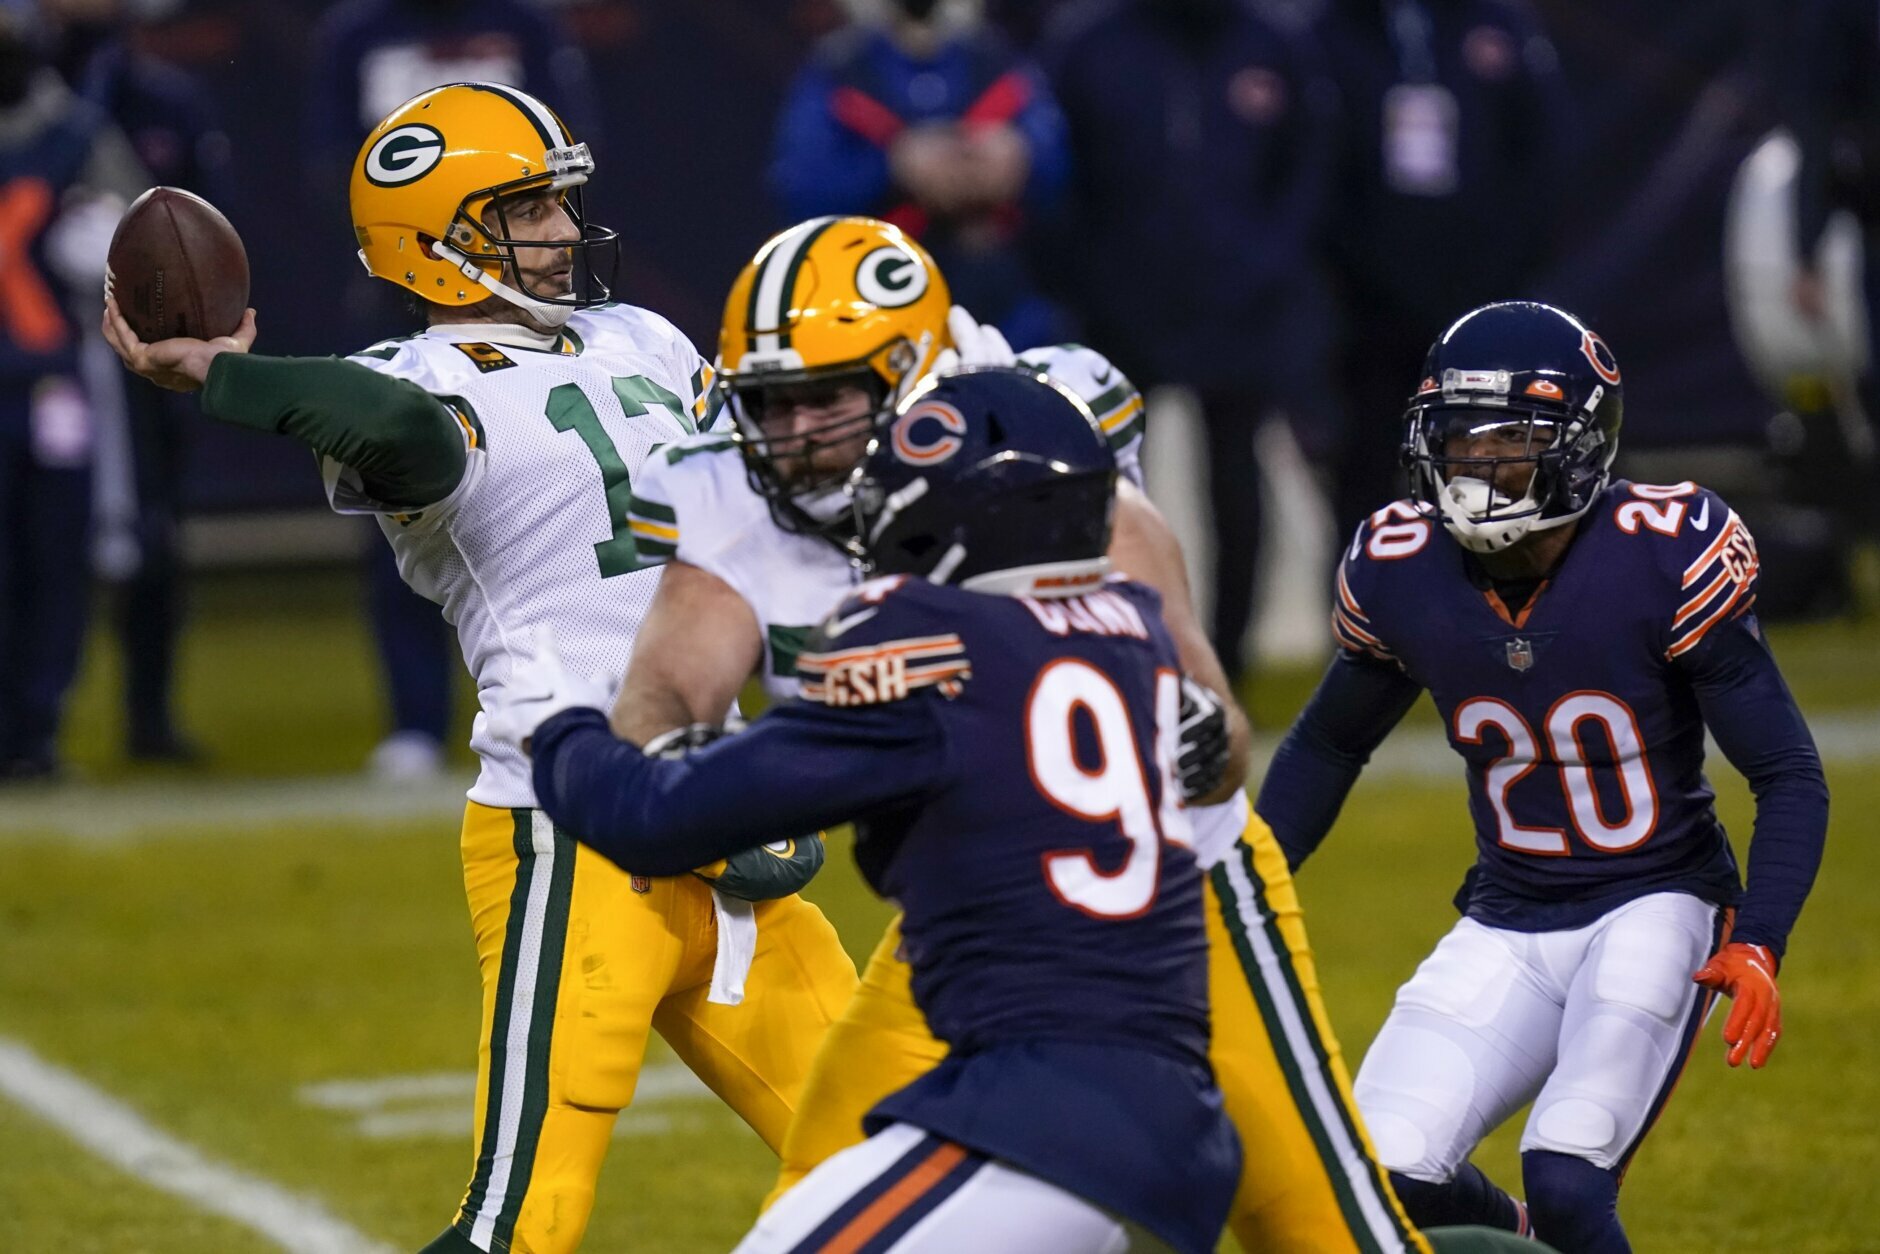 <p><b><i>Packers 35</i></b><br />
<b><i>Bears 16</i></b></p>
<p>Aaron Rodgers has been <a href="https://sports.yahoo.com/rodgers-3rd-mvp-meaningful-validate-play-234227147--nfl.html" target="_blank" rel="noopener">openly campaigning for MVP,</a> but this closing argument may have been more convincing than his actual words. <a href="https://twitter.com/NFL_Memes/status/1345899251709194241?s=20" target="_blank" rel="noopener">A-Rod had more TD passes than Green Bay had punts this season</a>, and even without David Bakhtiari watching his blind side, Rodgers should be able to lead the Pack to victory on the Frozen Tundra twice to hammer home the point.</p>
<p>Chicago, however, promises to have what amounts to a playoff cameo. Don&#8217;t let his late-season improvement fool you: Mitchell Trubisky is basically Blake Bortles 2.0, and the Bears shouldn&#8217;t be seduced into paying him top dollar to stick around.</p>
